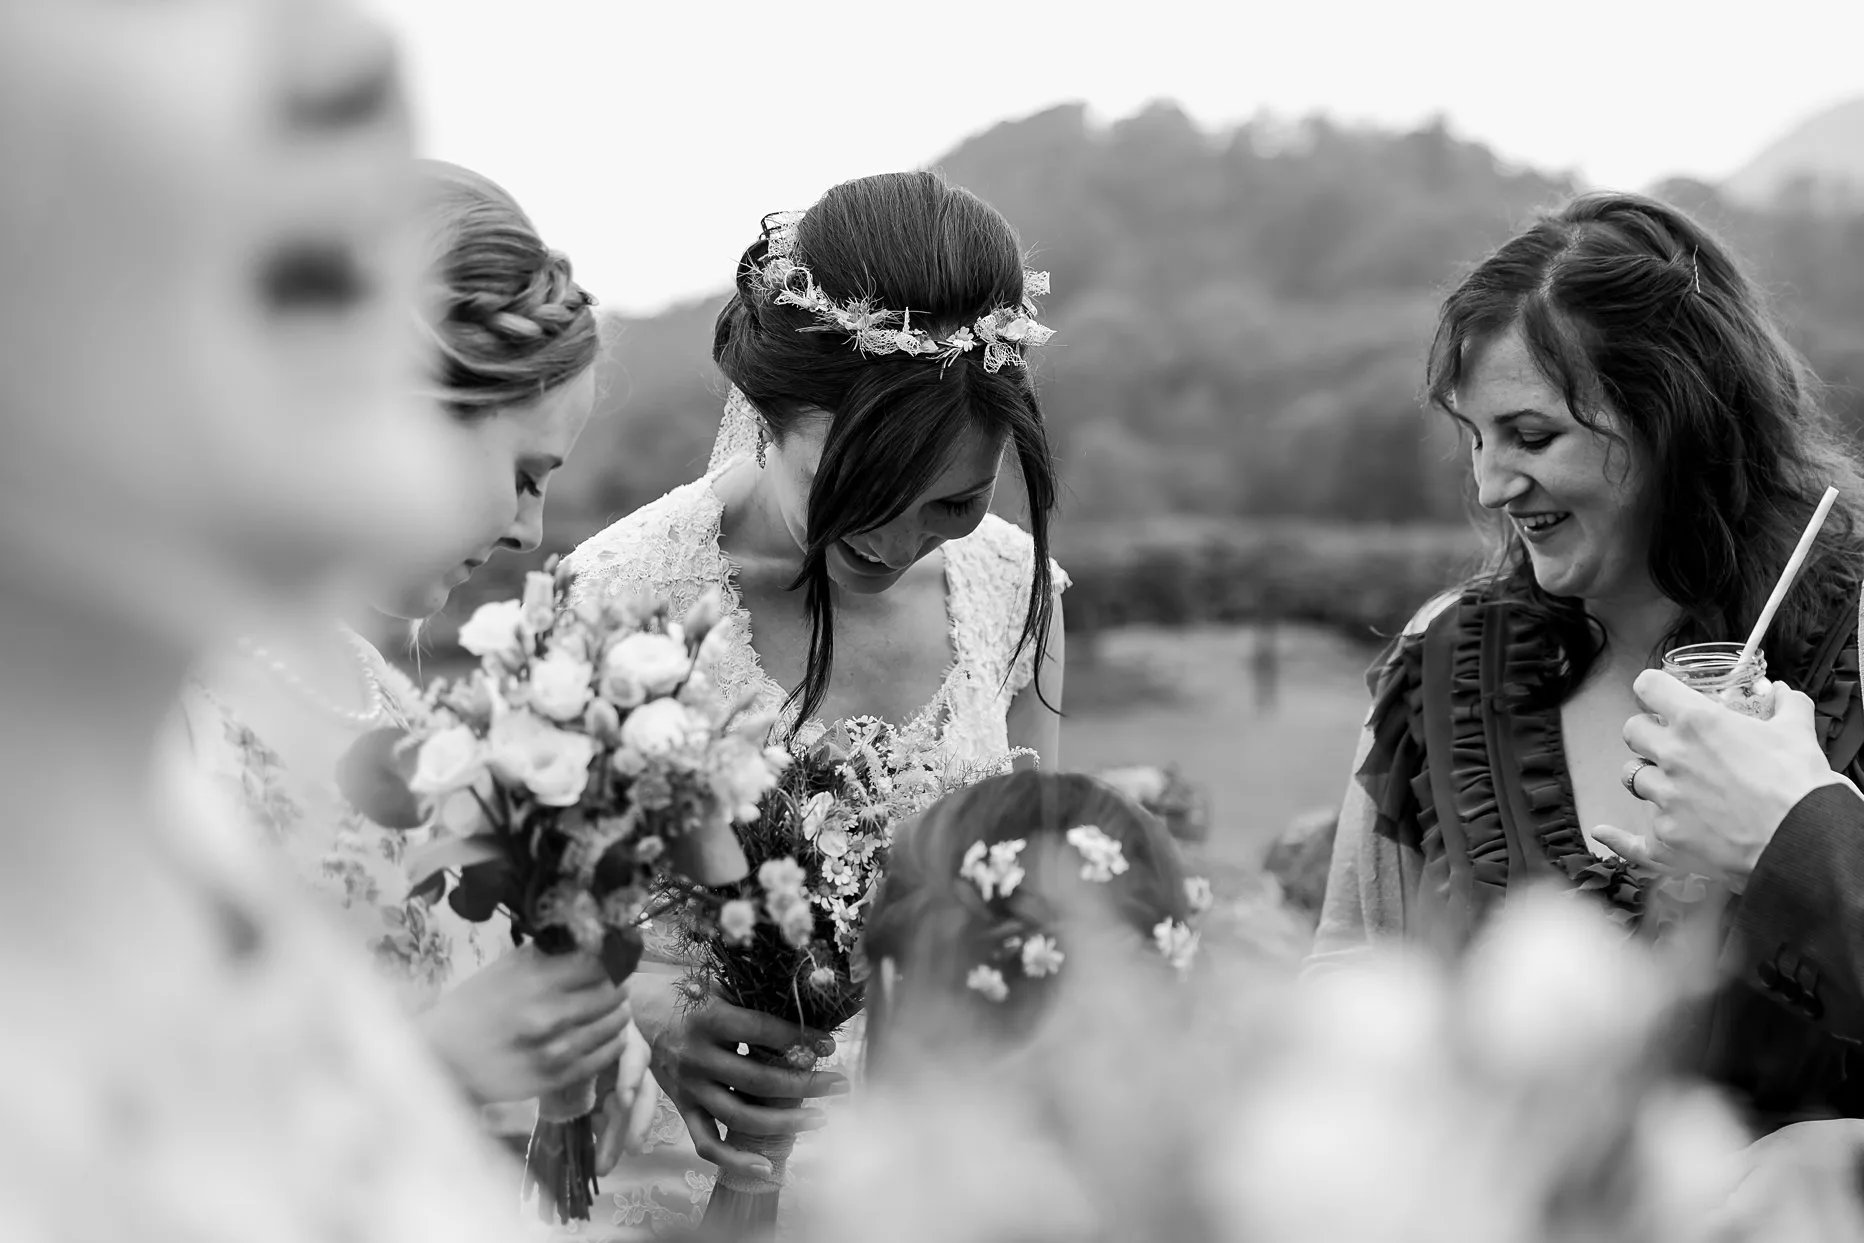 Candid photograph of the bride talking to wedding guests during the drinks reception at New House Farm.